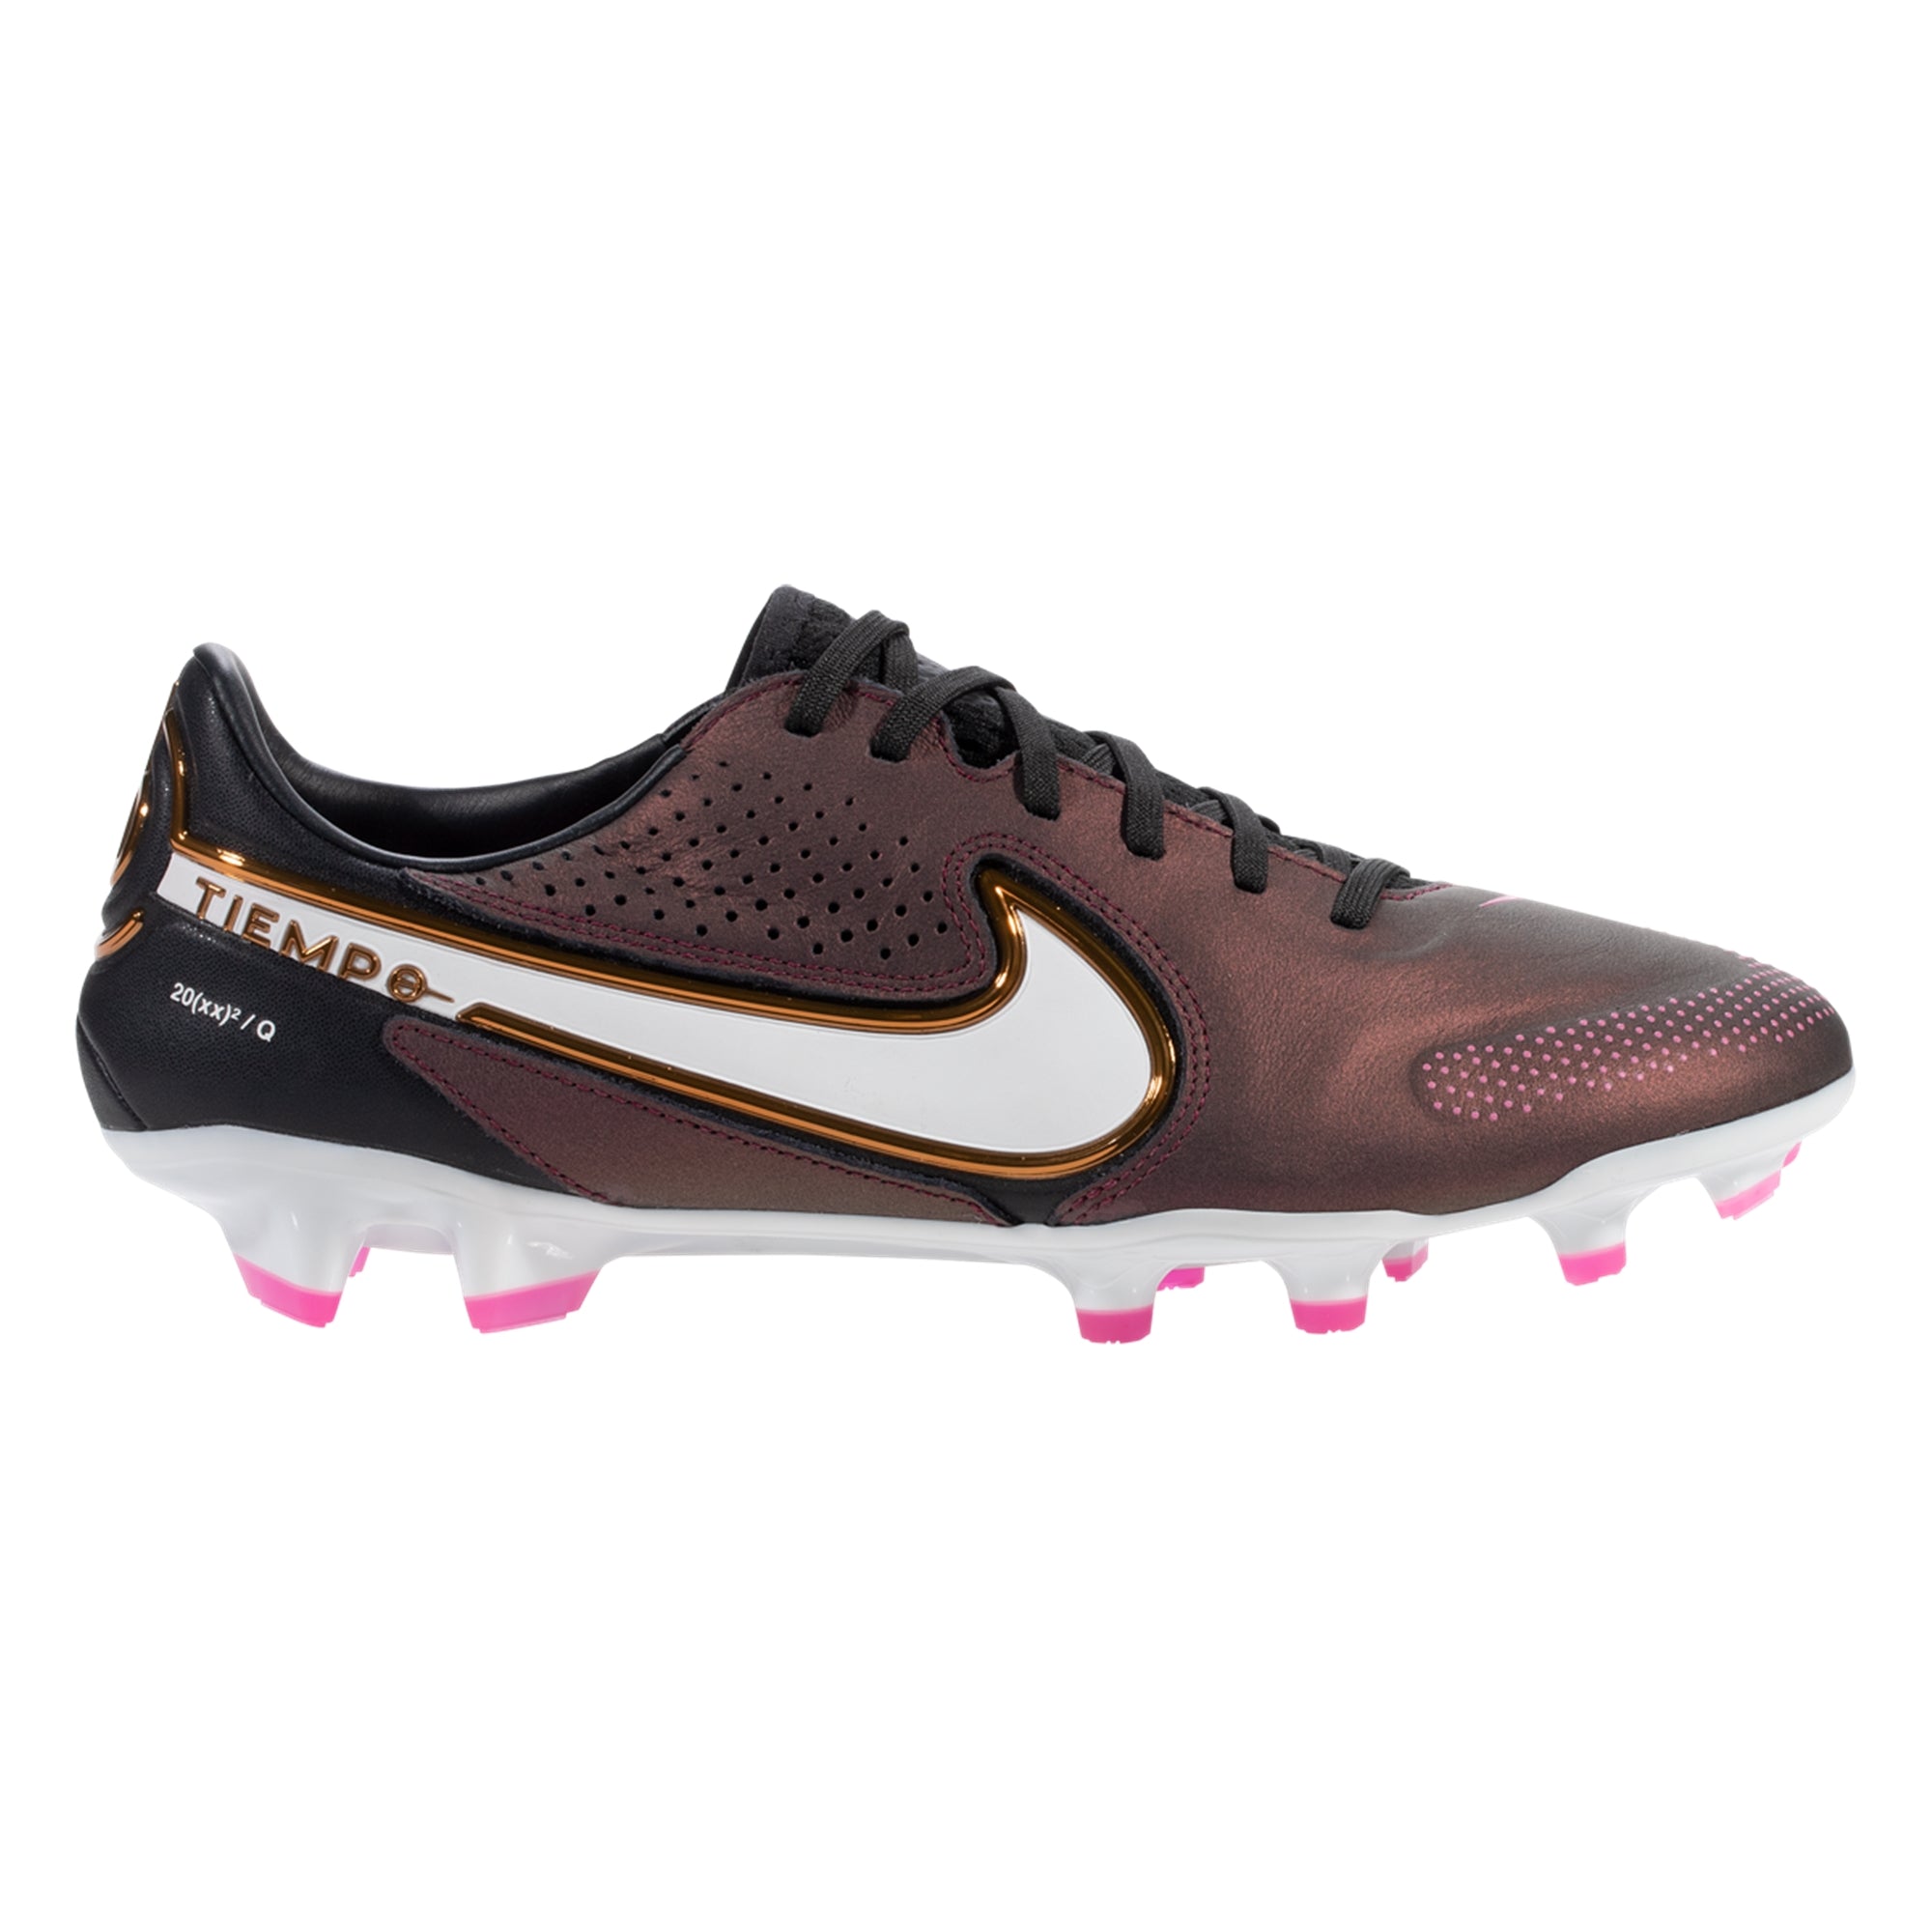 Nike Tiempo Legend 9 Pro Q FG Firm Soccer Cleats - Space Purple/White DR5979-510 – Soccer Zone USA